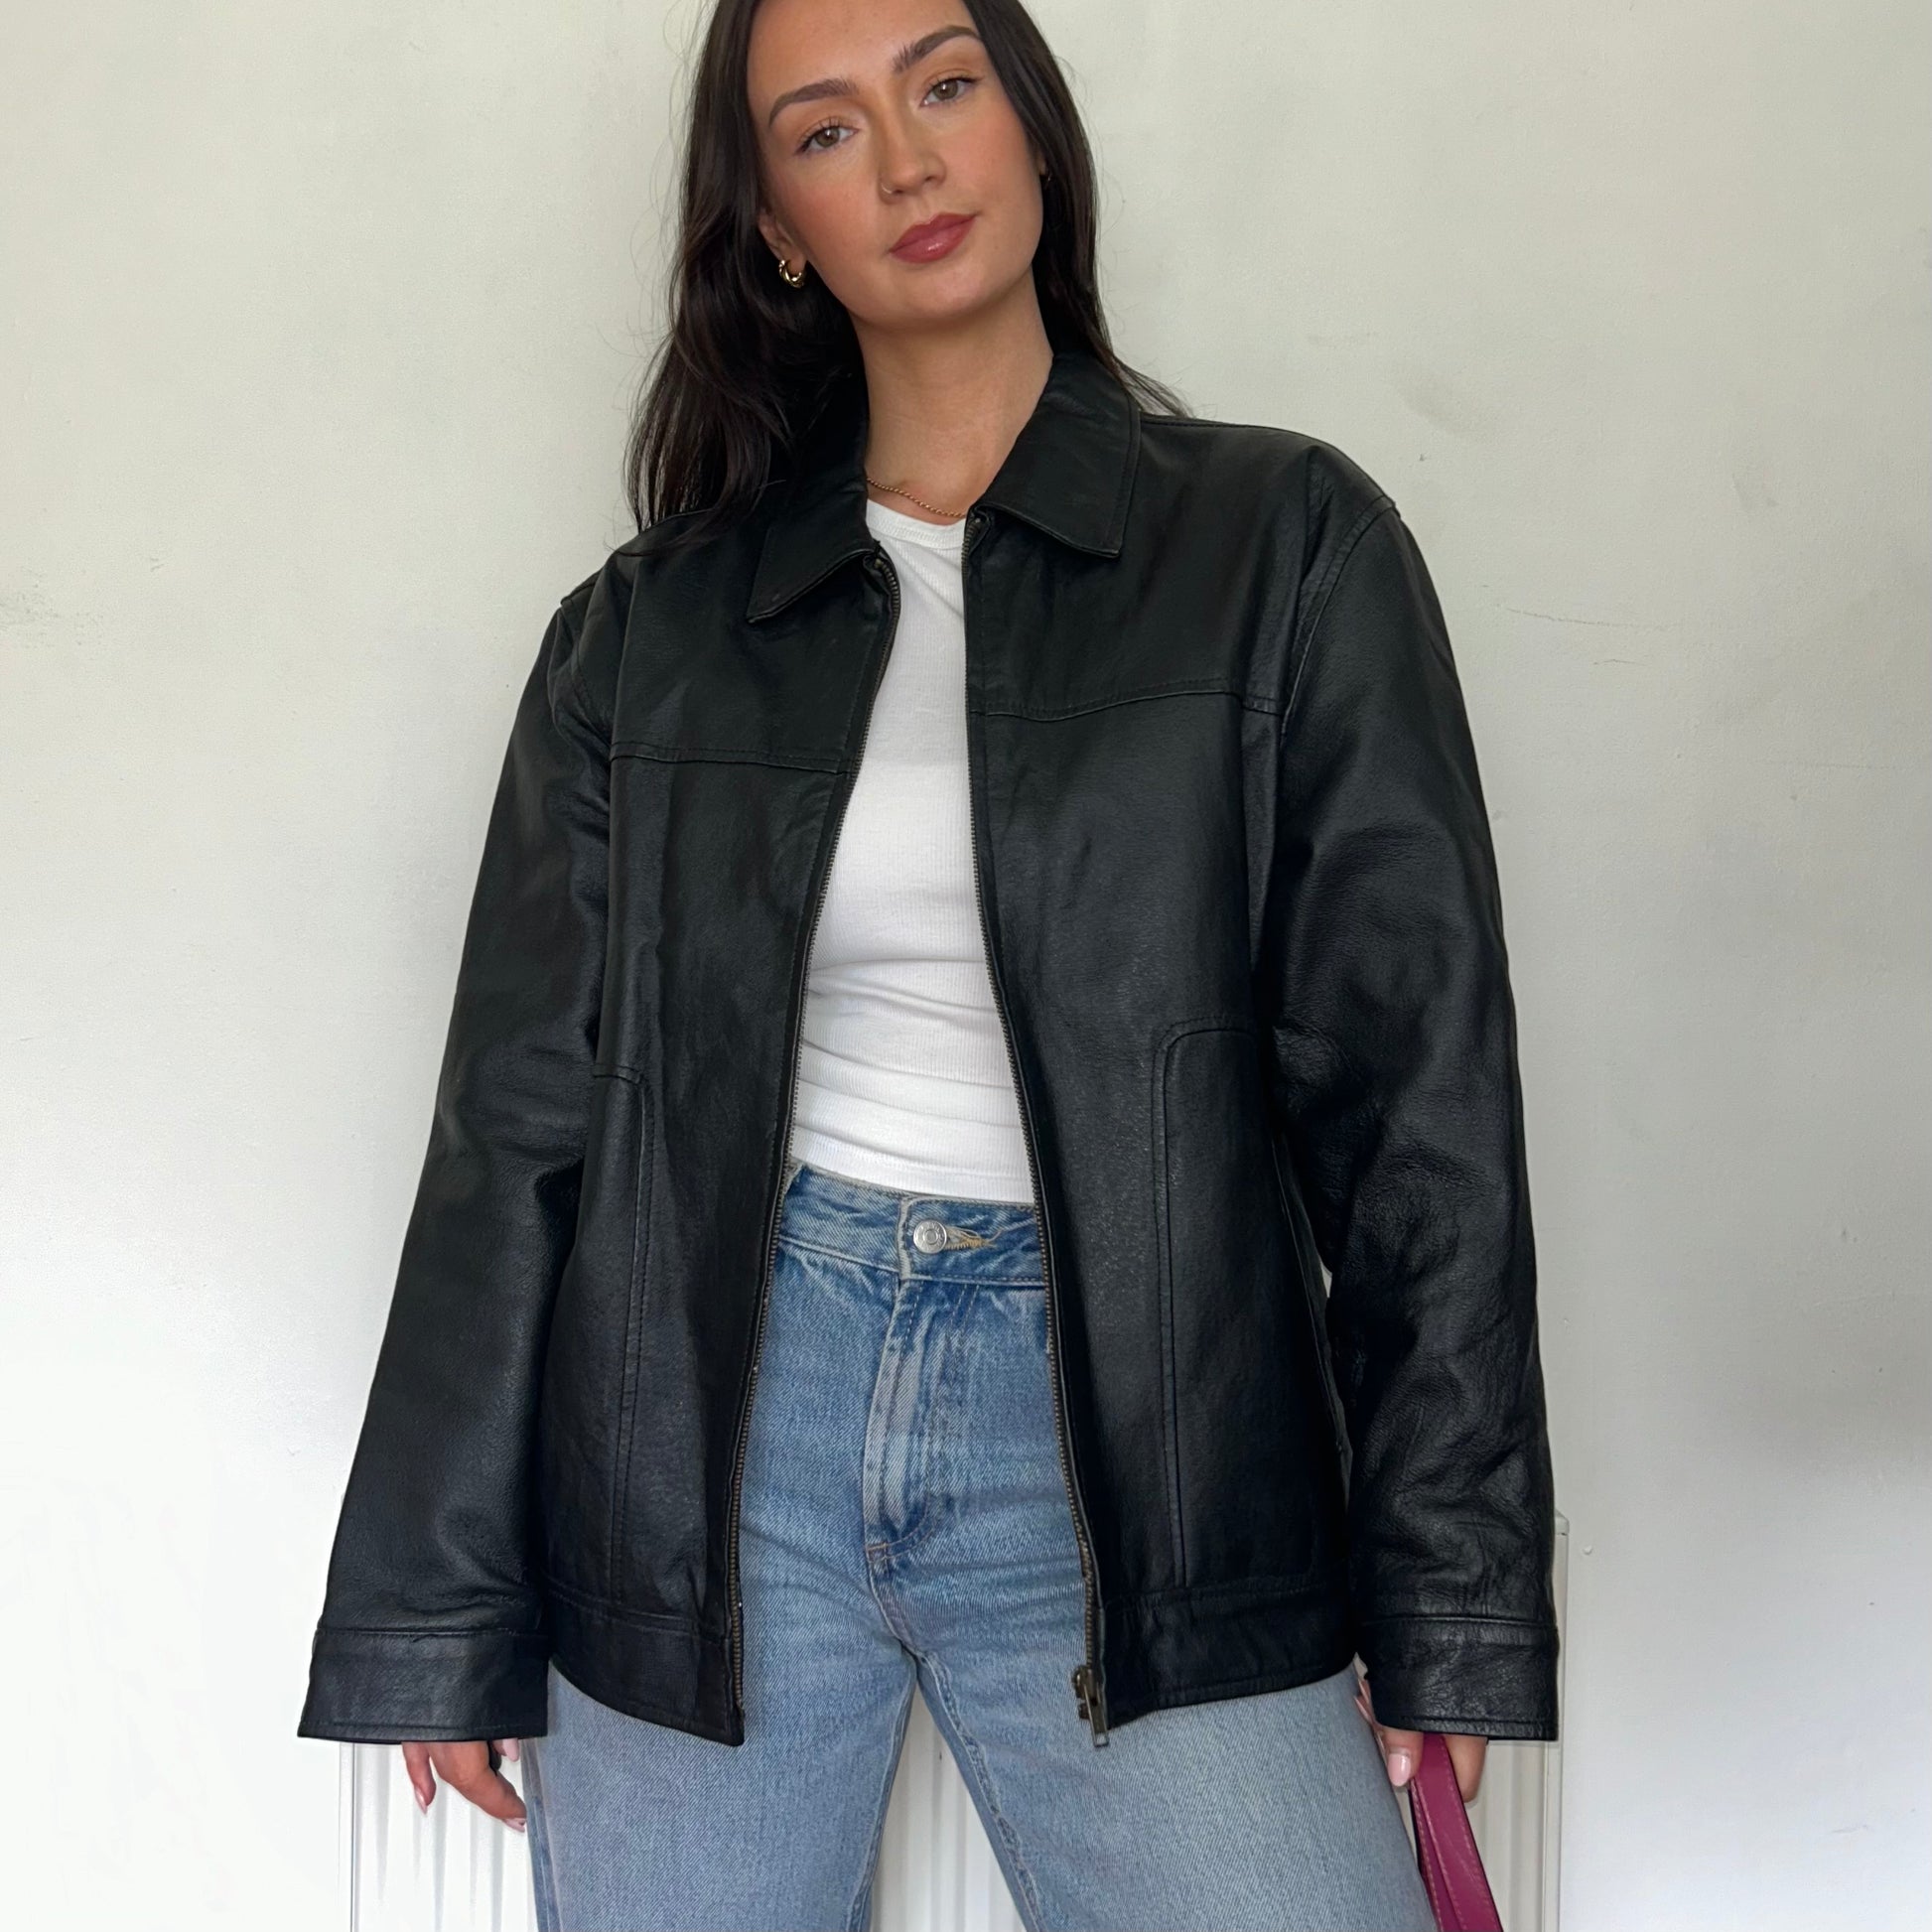 close up of black leather vintage bomber jacket shown on a model wearing a white top and blue jeans